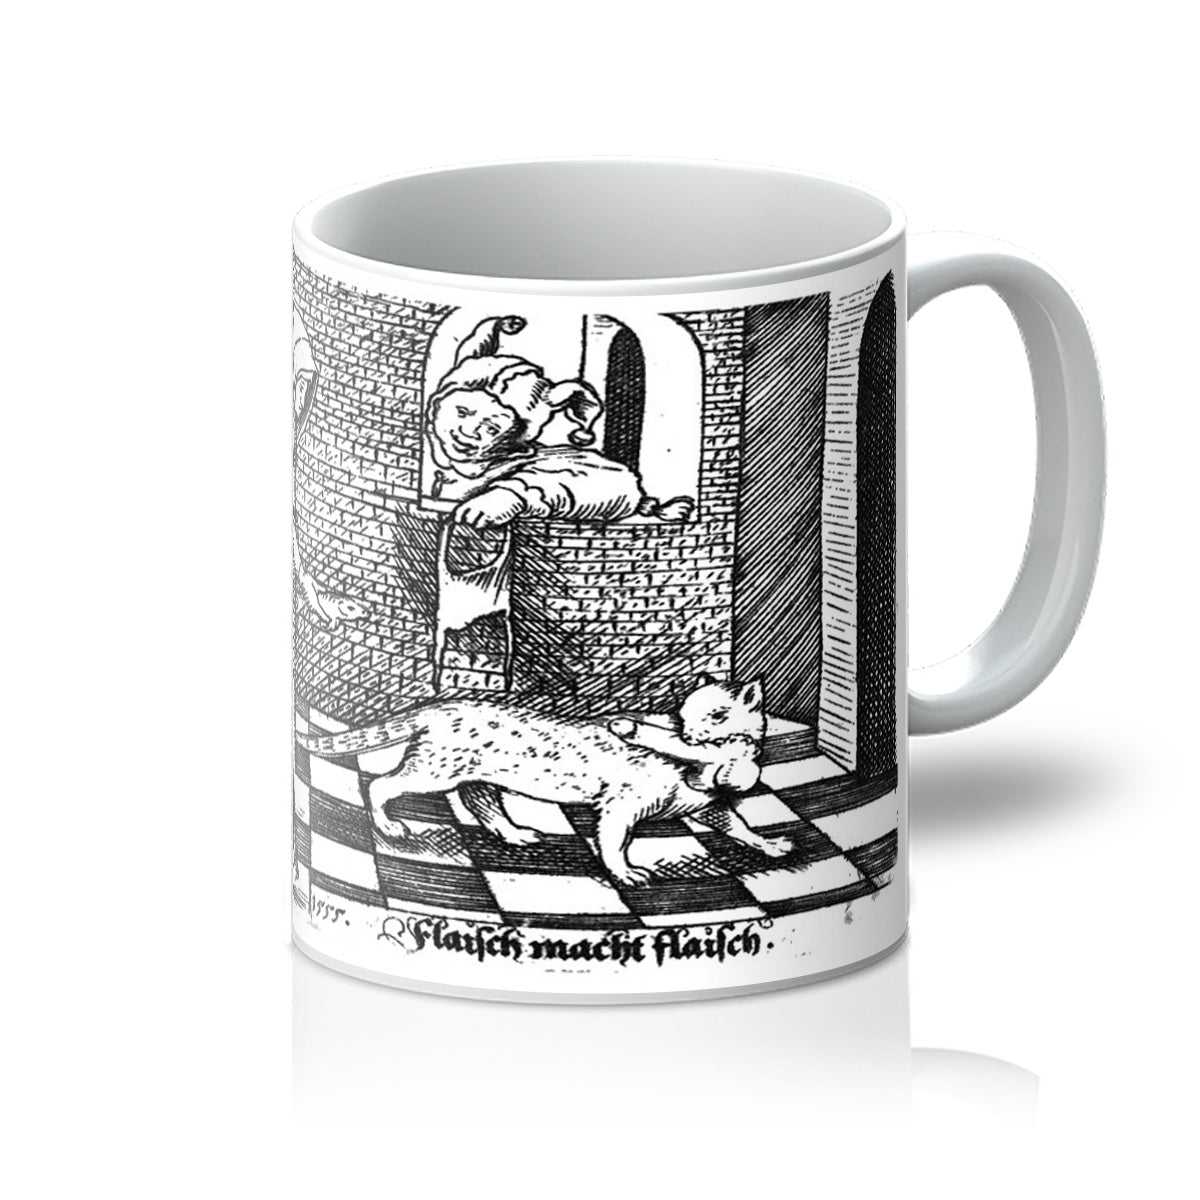 “Nun walks with fish in hand chasing a cat. She wants to trade the fish with a penis that the cat has in its mouth. A jester watches through a window frame” - Rijkmuseum.  Flemish engraving from 1555 - "Flaisch macht Flaisch” (flesh gives flesh”).  Our high quality photo mugs are beautiful yet durable and have been tested to 100+ dishwasher cycles.  This custom mug comes in all white.